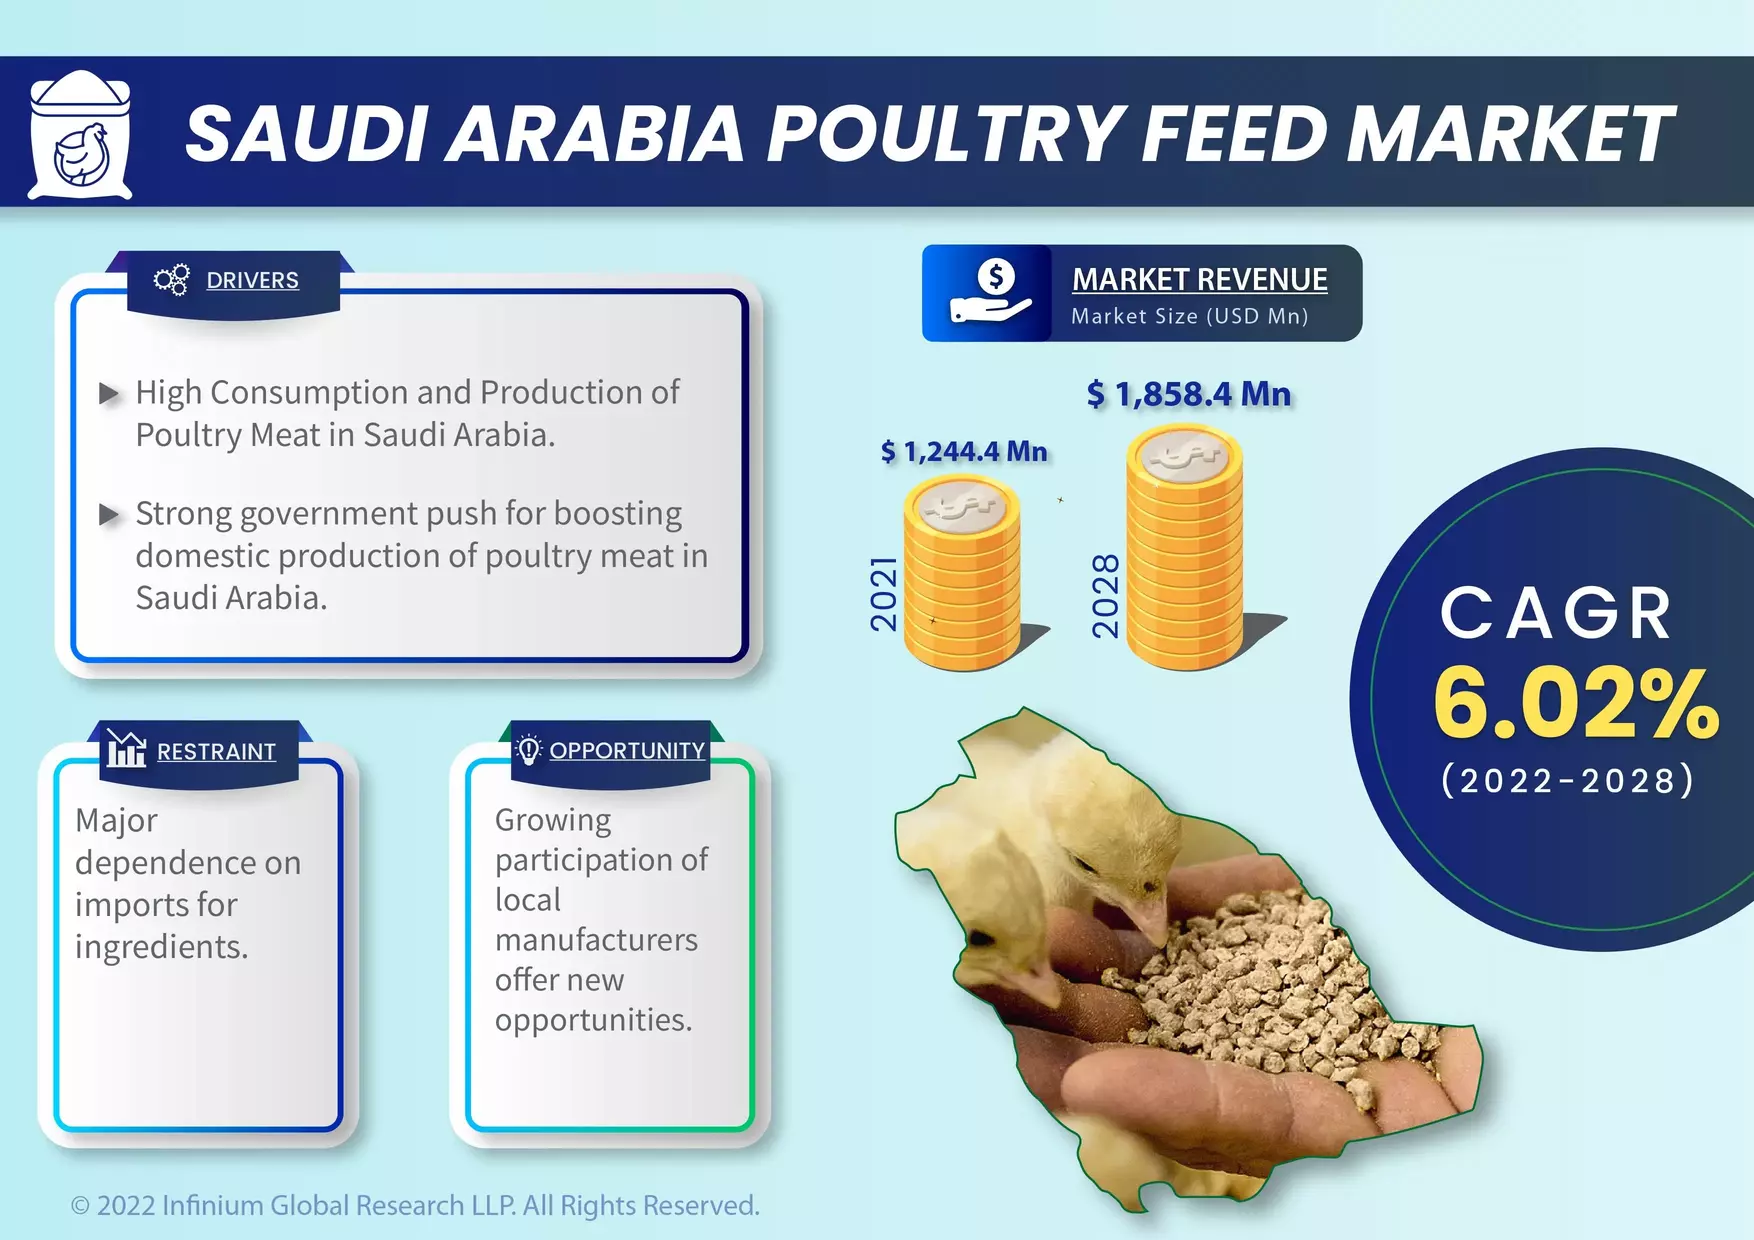 Infograph - Saudi Arabia Poultry Feed Market Was Valued at USD 1,244.4 Million in 2021 and